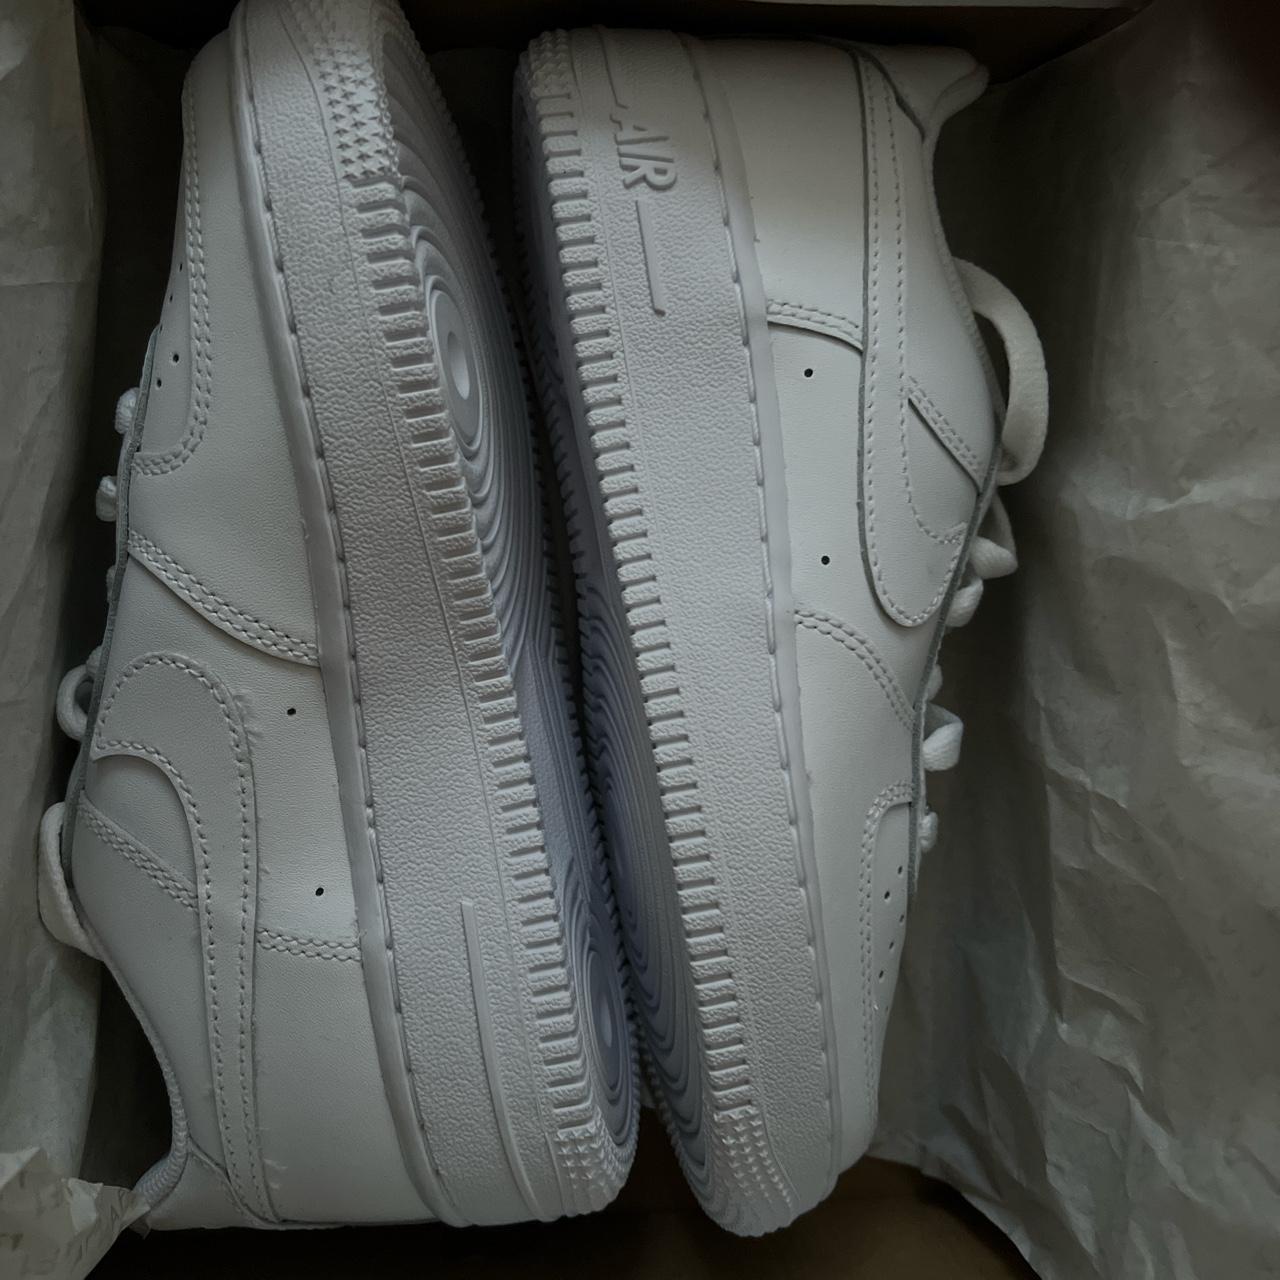 Fresh new airforce one limited women - Depop